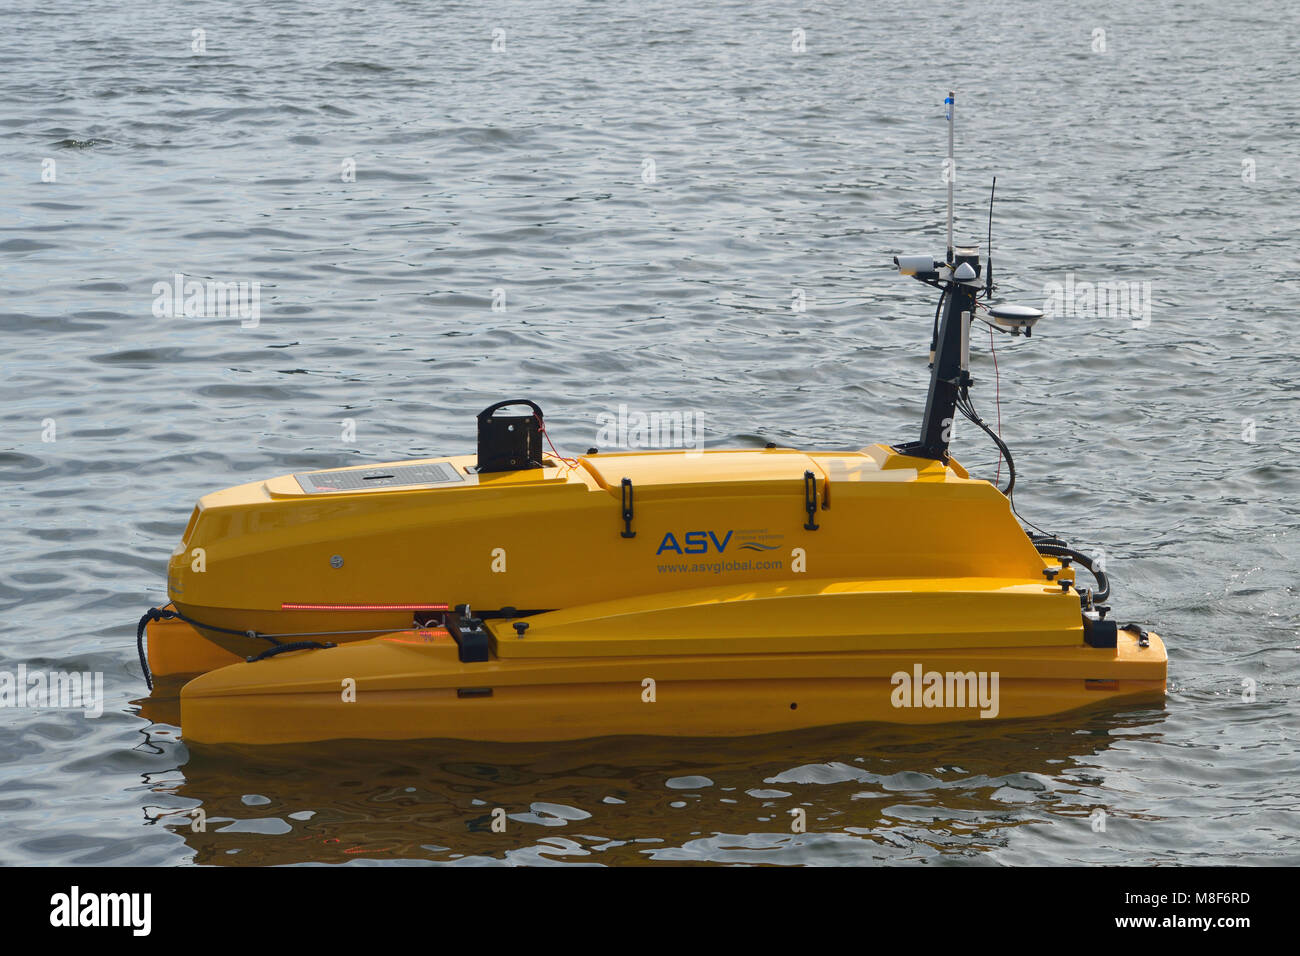 ASV Global C-CAT3 unmanned autonomous surface vessel being demonstrated at the Oceanology International 2018 exhibition in London's Royal Docks Stock Photo